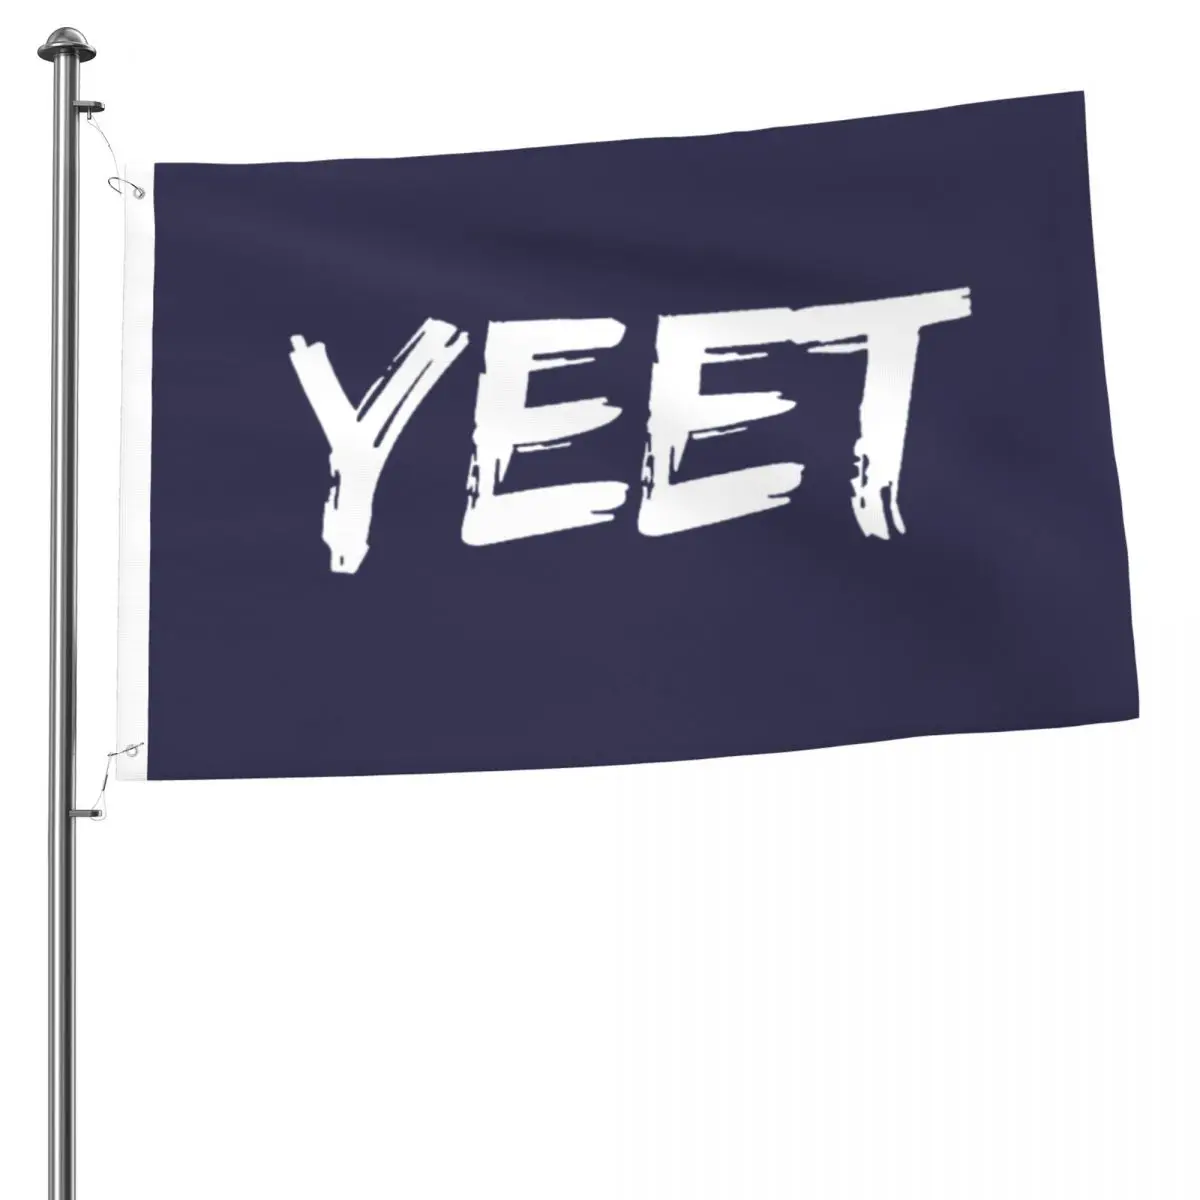 

YEET Outdoor Flag Decorative Banners For Home Decor House Yard Outdoor Party Supplies 2x3ft